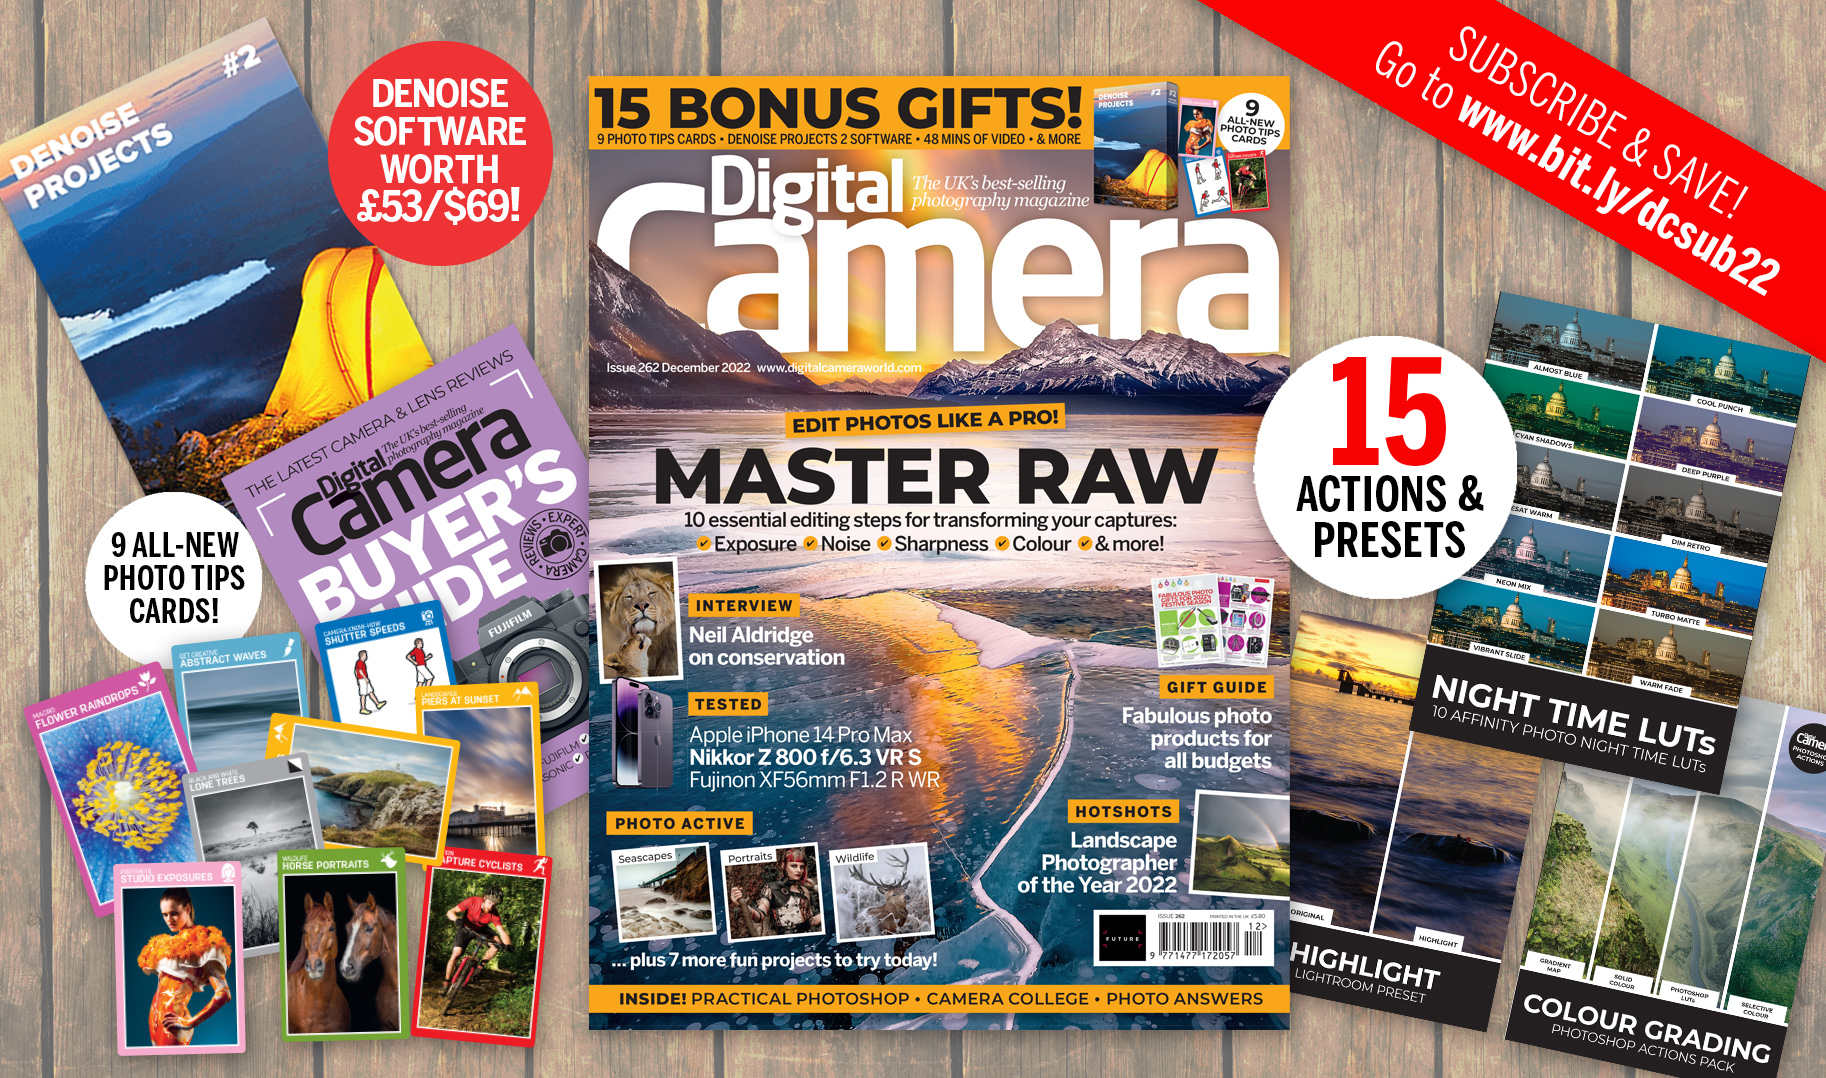 Black Friday subs deal! Save 50% when you subscribe to Digital Camera